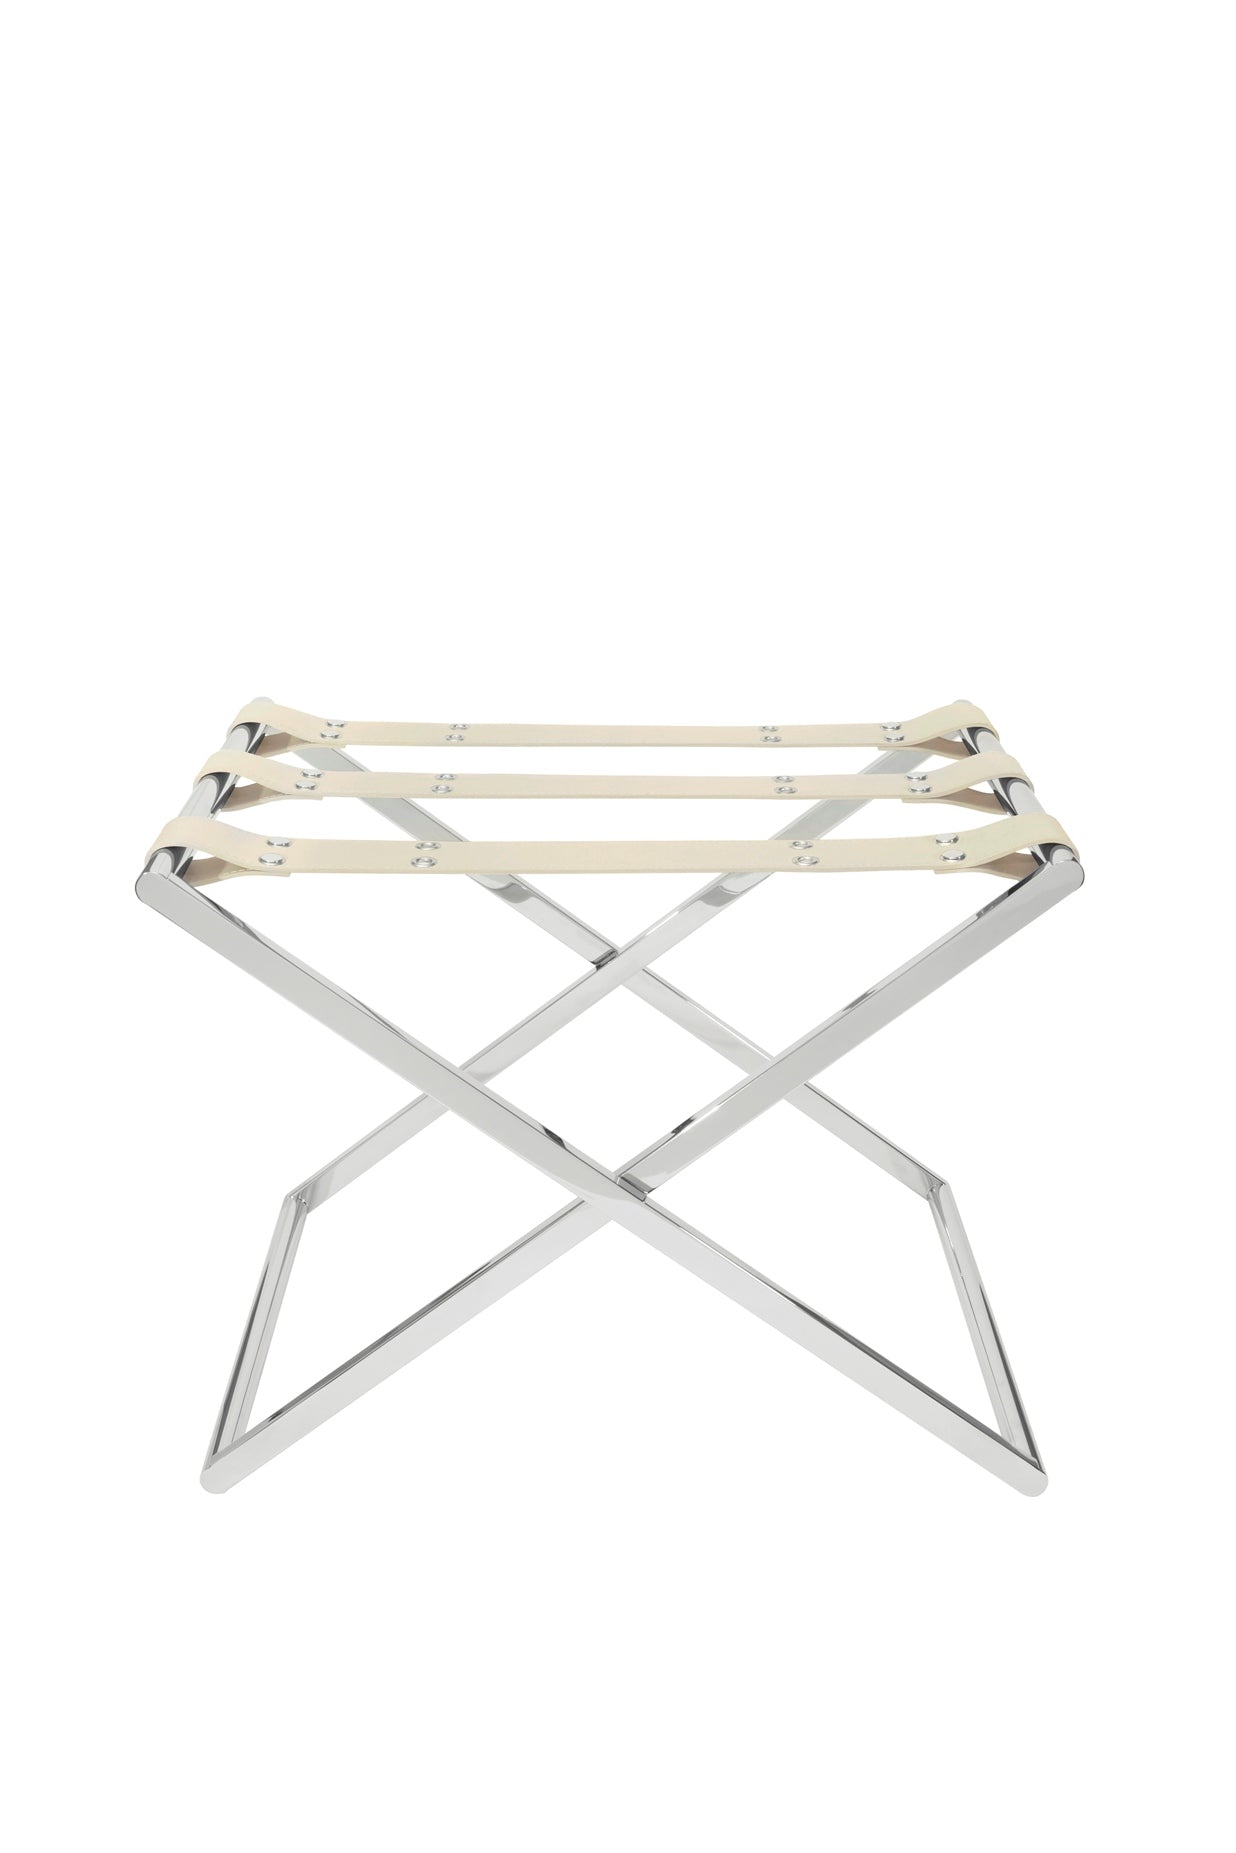 Sibari Luggage Rack by Riviere | Folding luggage rack with three leather straps. Chrome or gold metal legs with adjustable height. | Furniture and Luggage Accessories | 2Jour Concierge, your luxury lifestyle shop